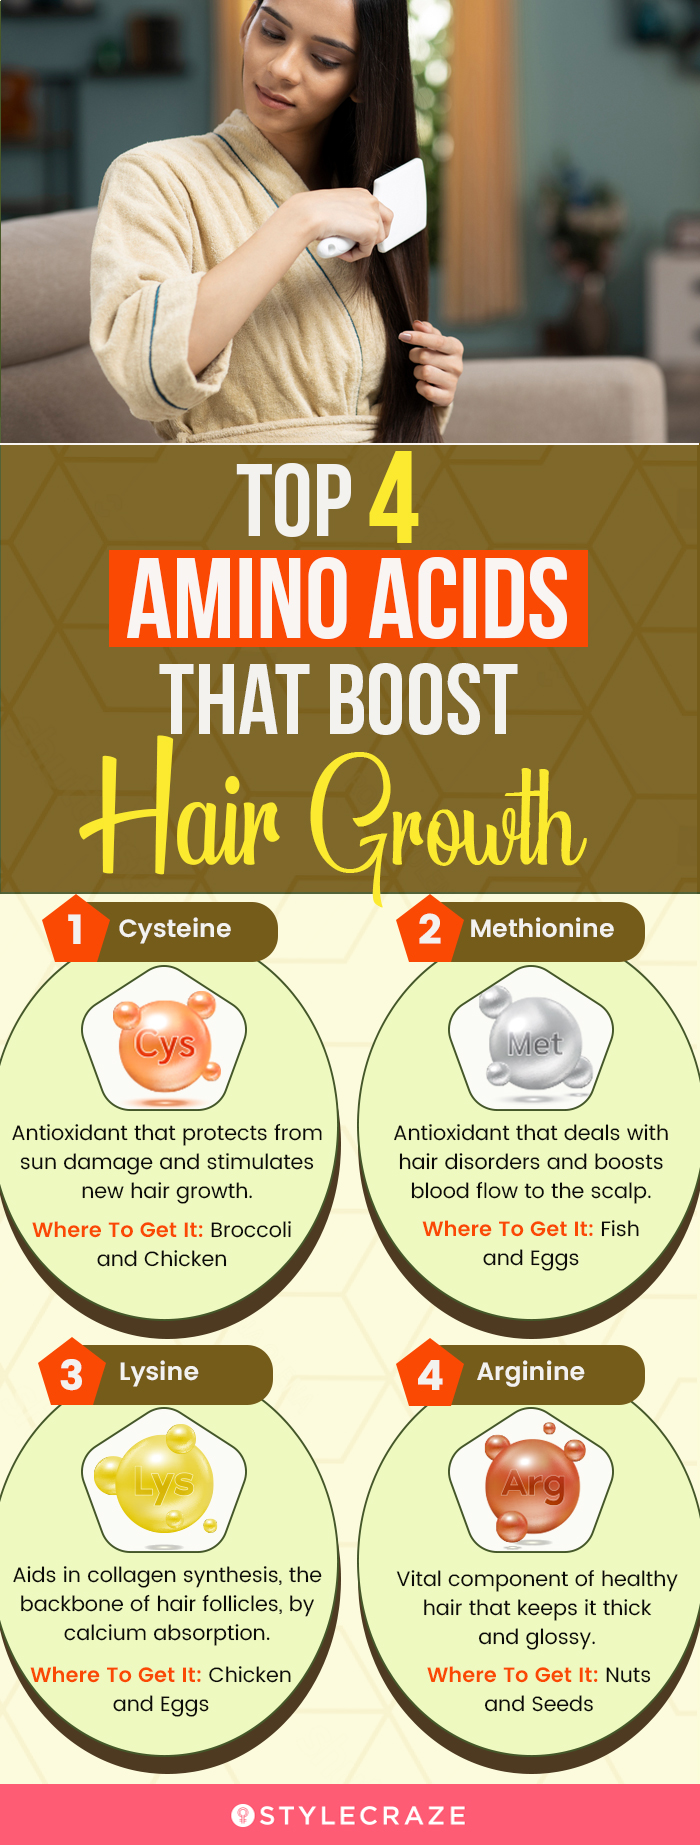 9 Amino Acids For Hair Growth, Food Sources, Benefits